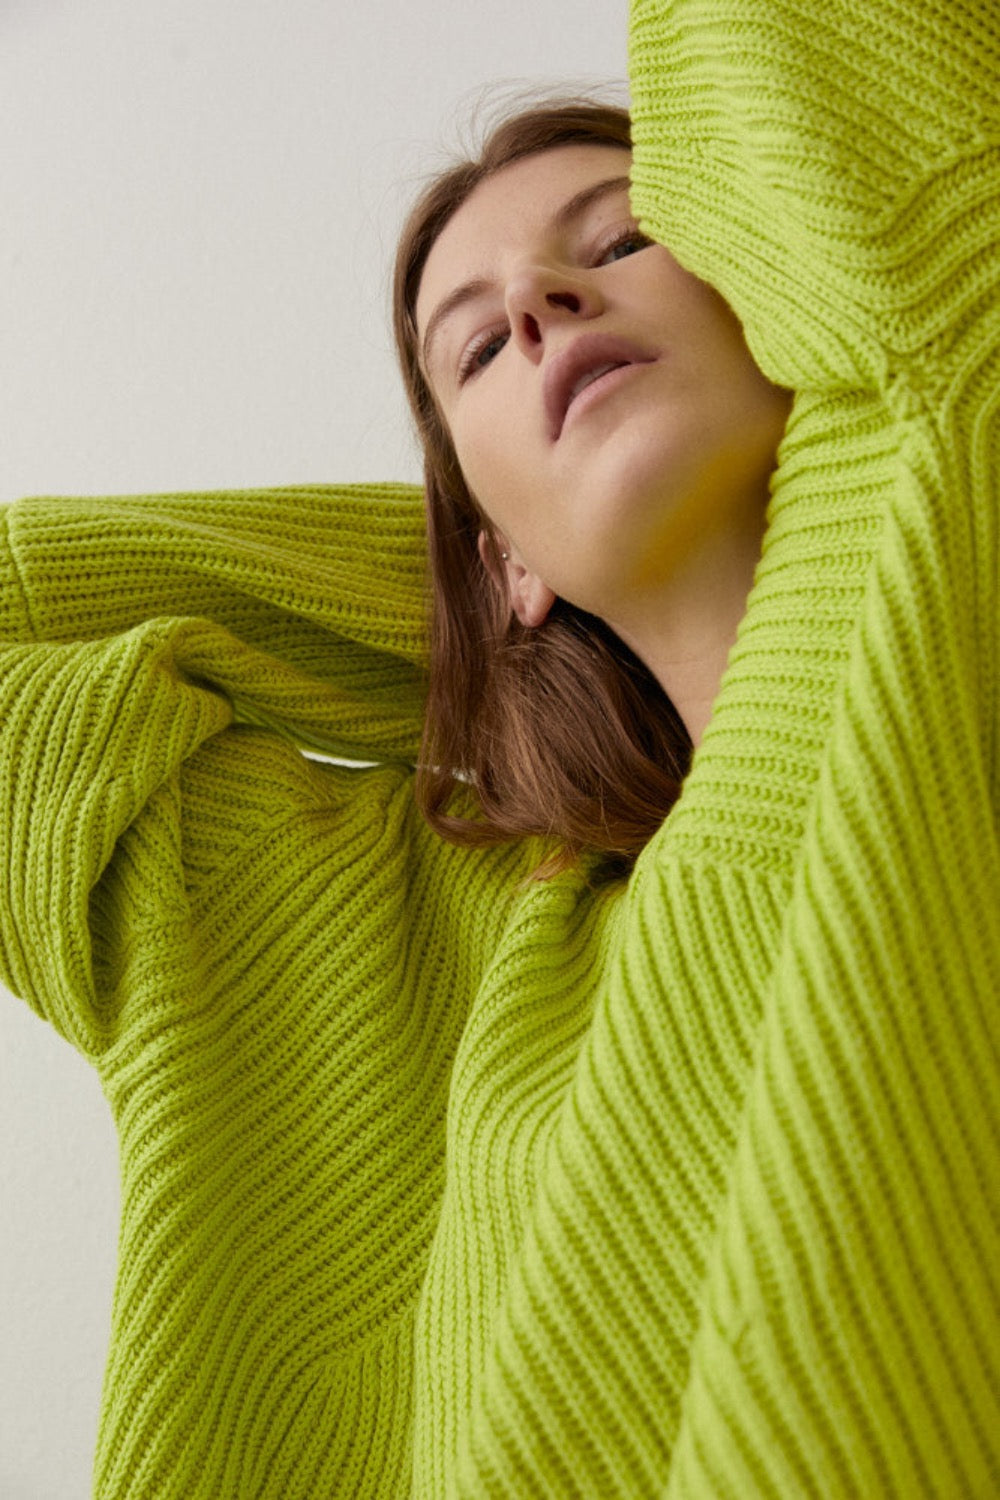 Sally Sweater in Lime - BLANCA